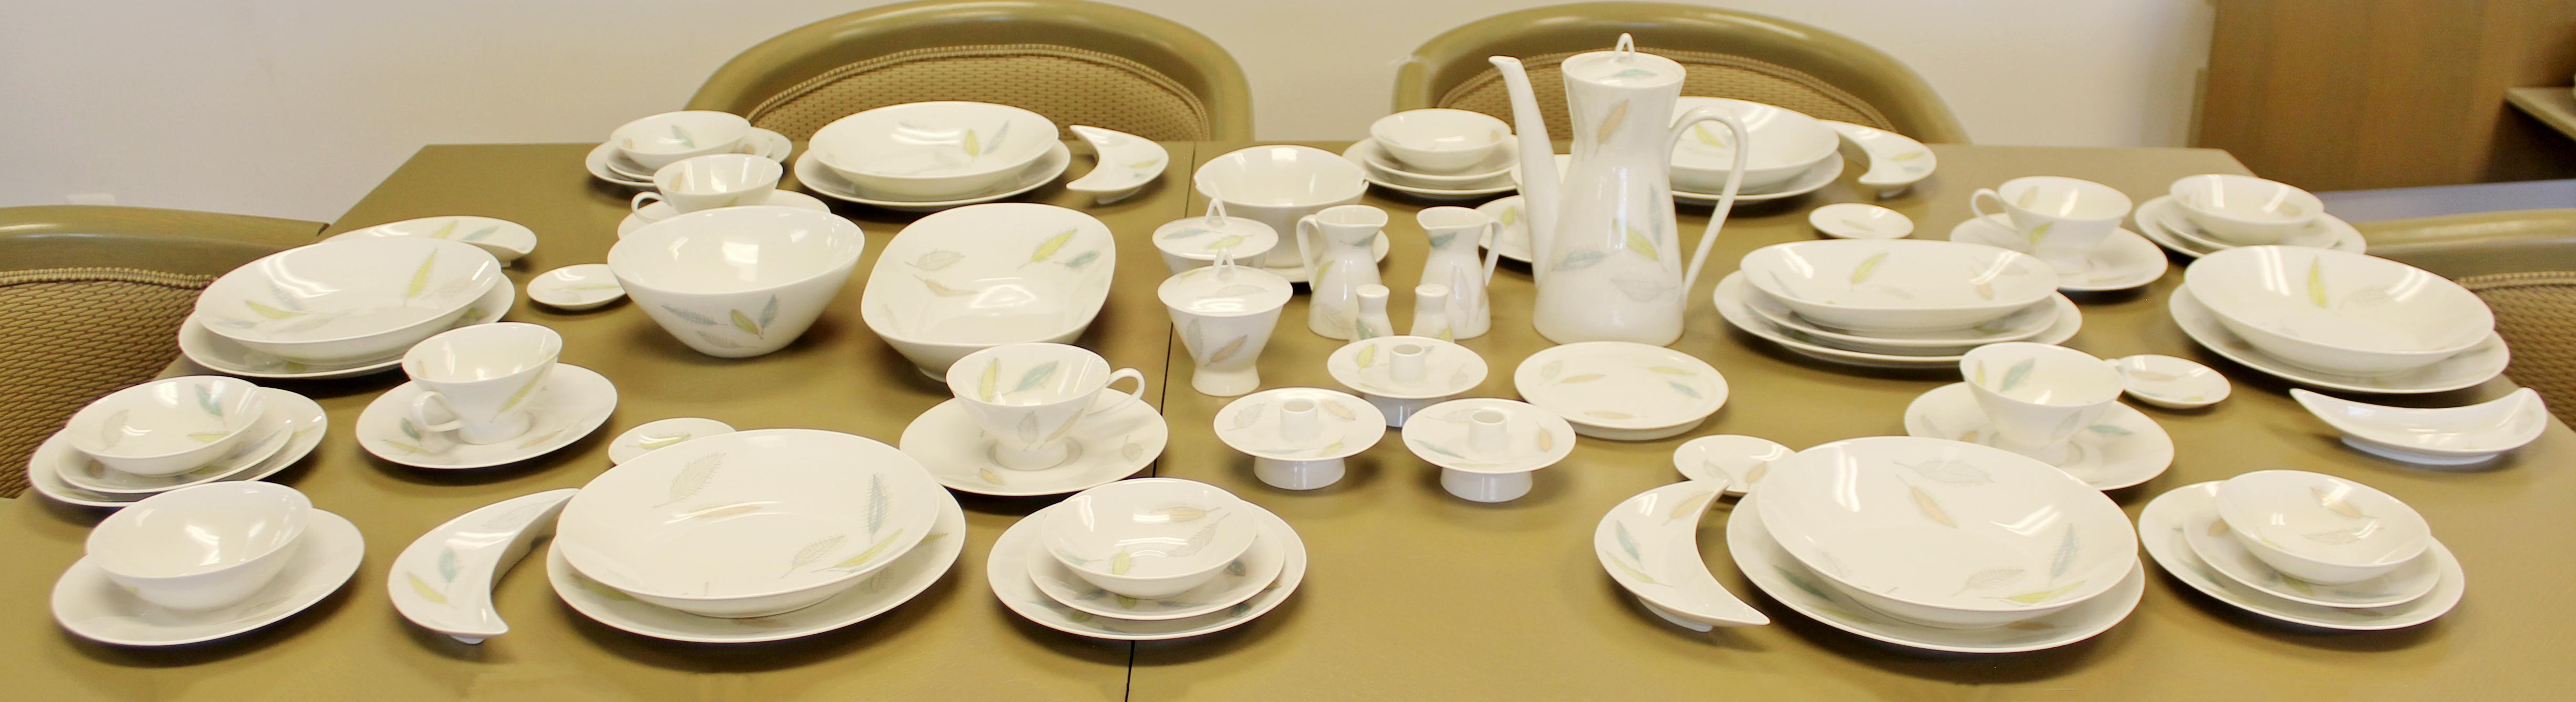 For your consideration is a simple and stunning, porcelain ceramic dinnerware set, with a multi-colored leaf motif, Form 2000 by Raymond Loewy for Rosenthal, made in Germany, circa 1950s. The set is called Colored Leaves. Set includes ten dinner